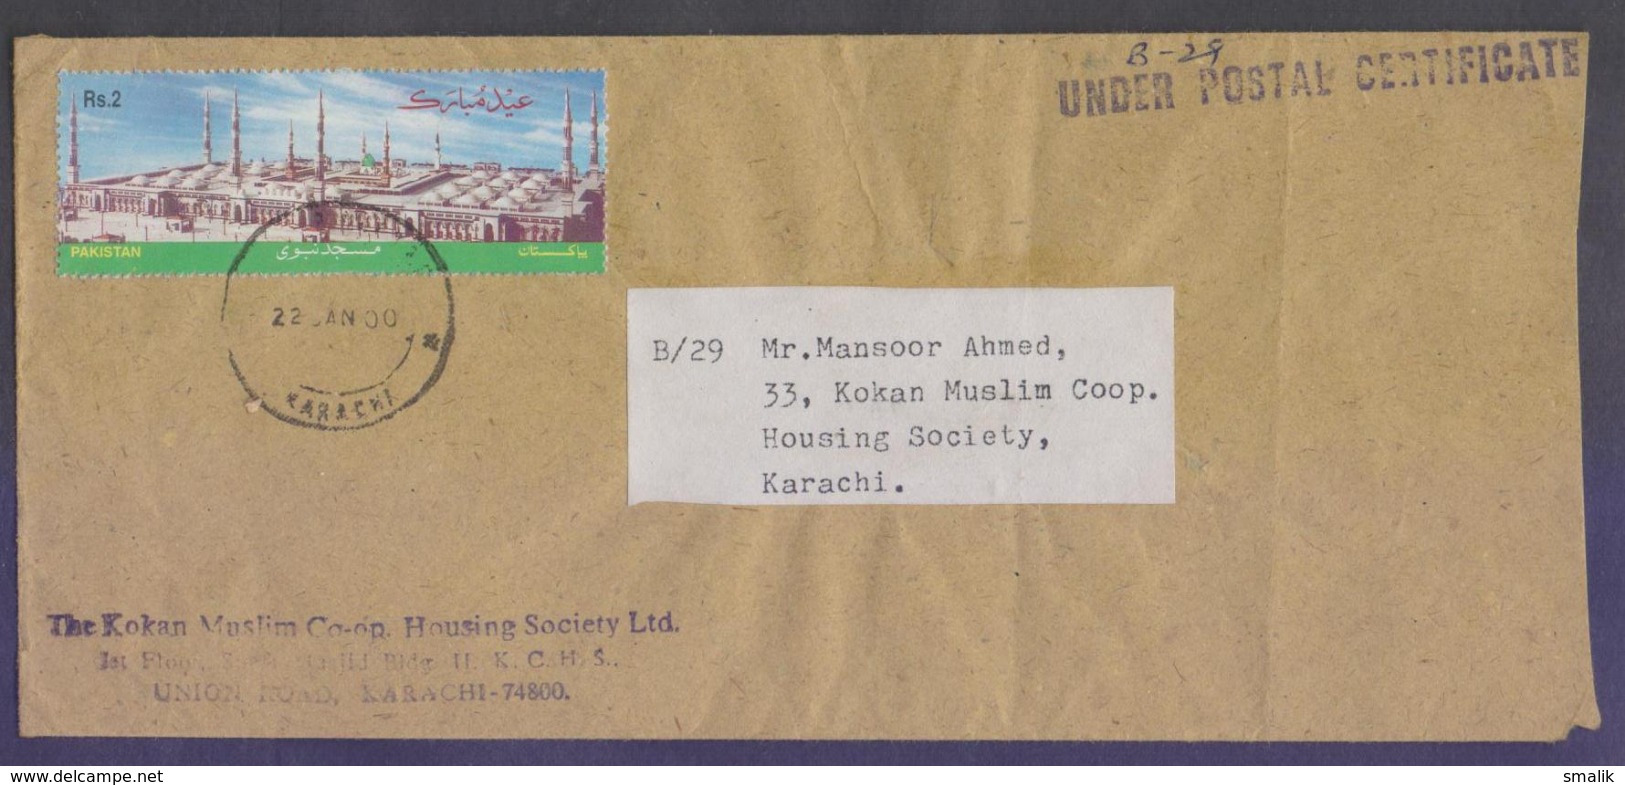 Prophet's Mosque Madinah, Islamic, Withdrawn Stamp On Cover, Postal Used 22.1.2000 From PAKISTAN - Pakistan